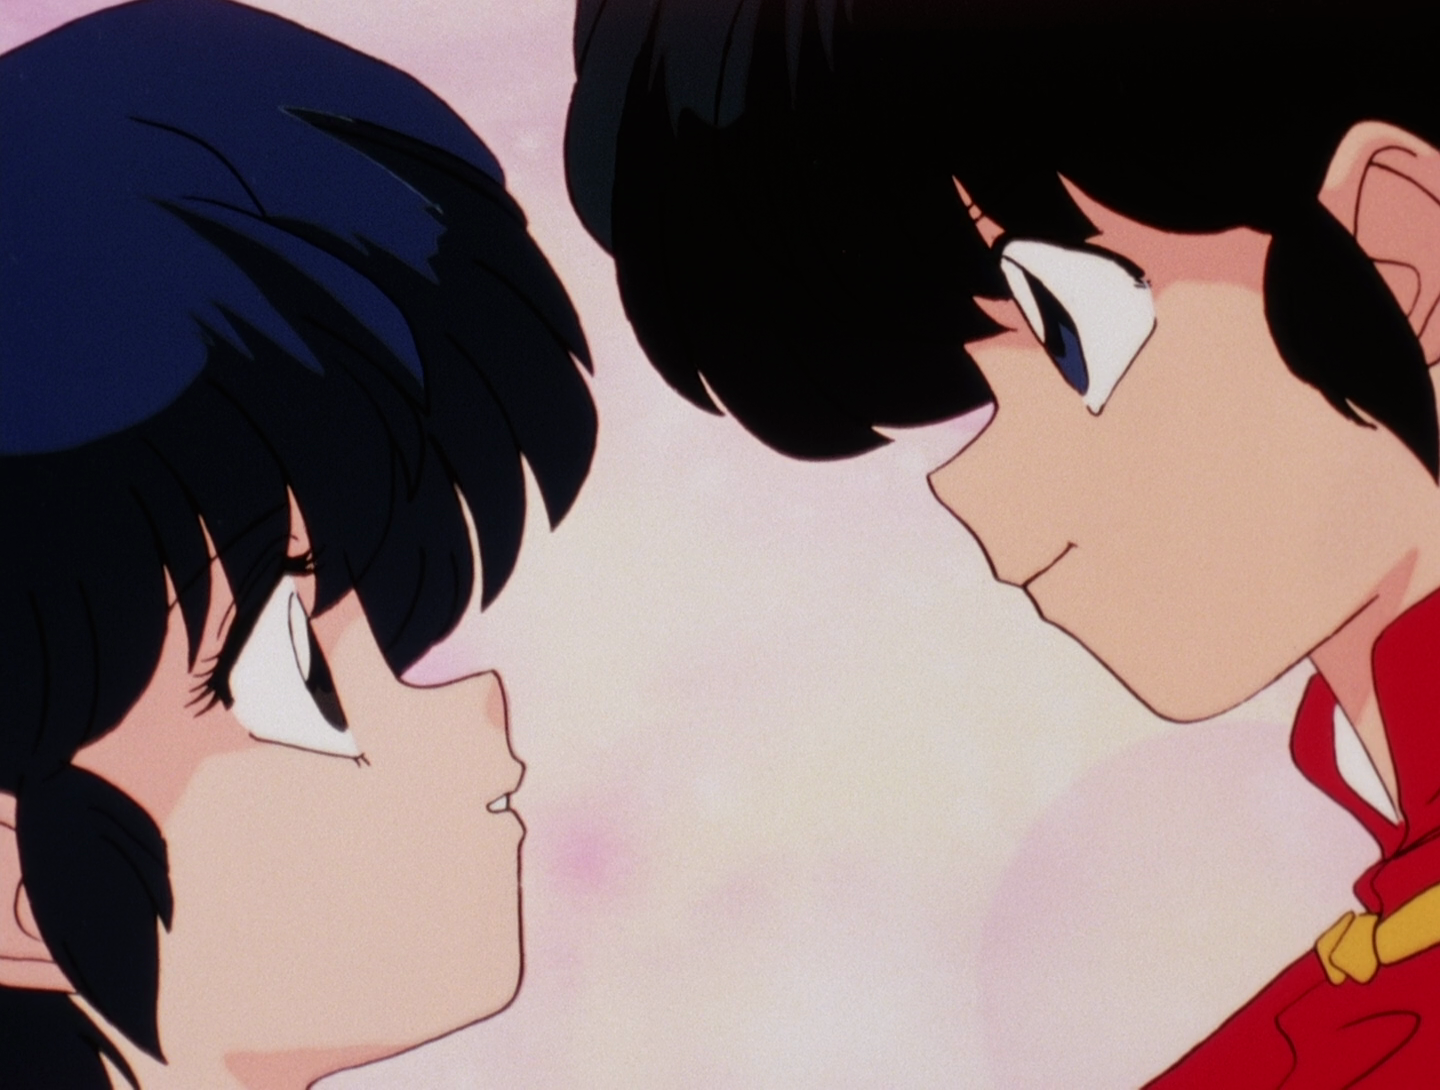 Ranma 1/2 Images on Fanpop.